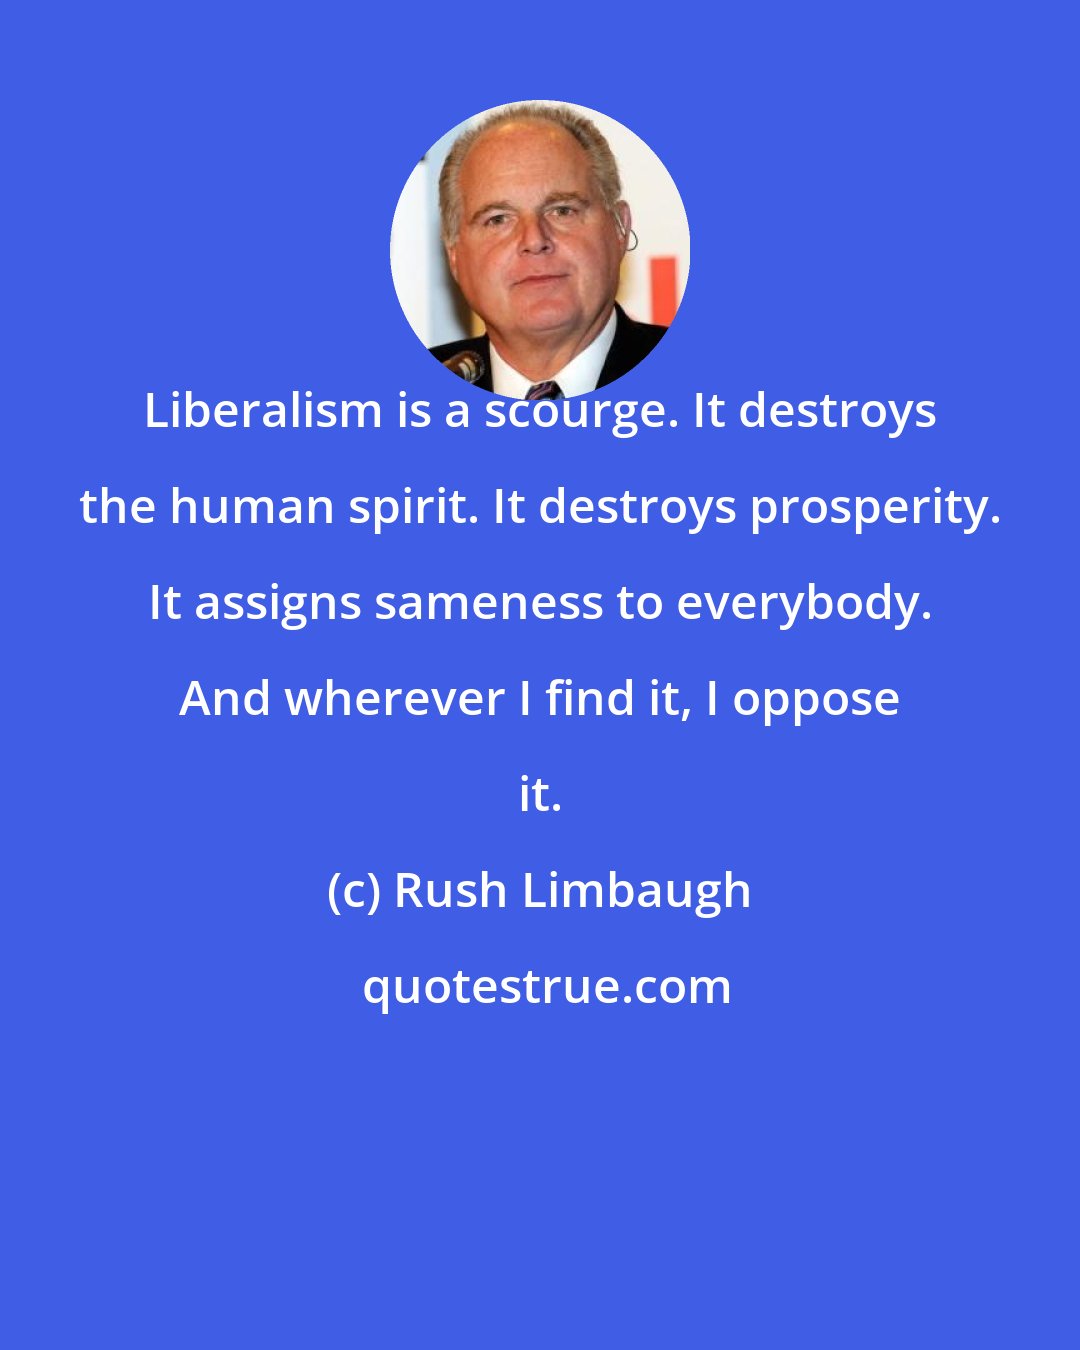 Rush Limbaugh: Liberalism is a scourge. It destroys the human spirit. It destroys prosperity. It assigns sameness to everybody. And wherever I find it, I oppose it.